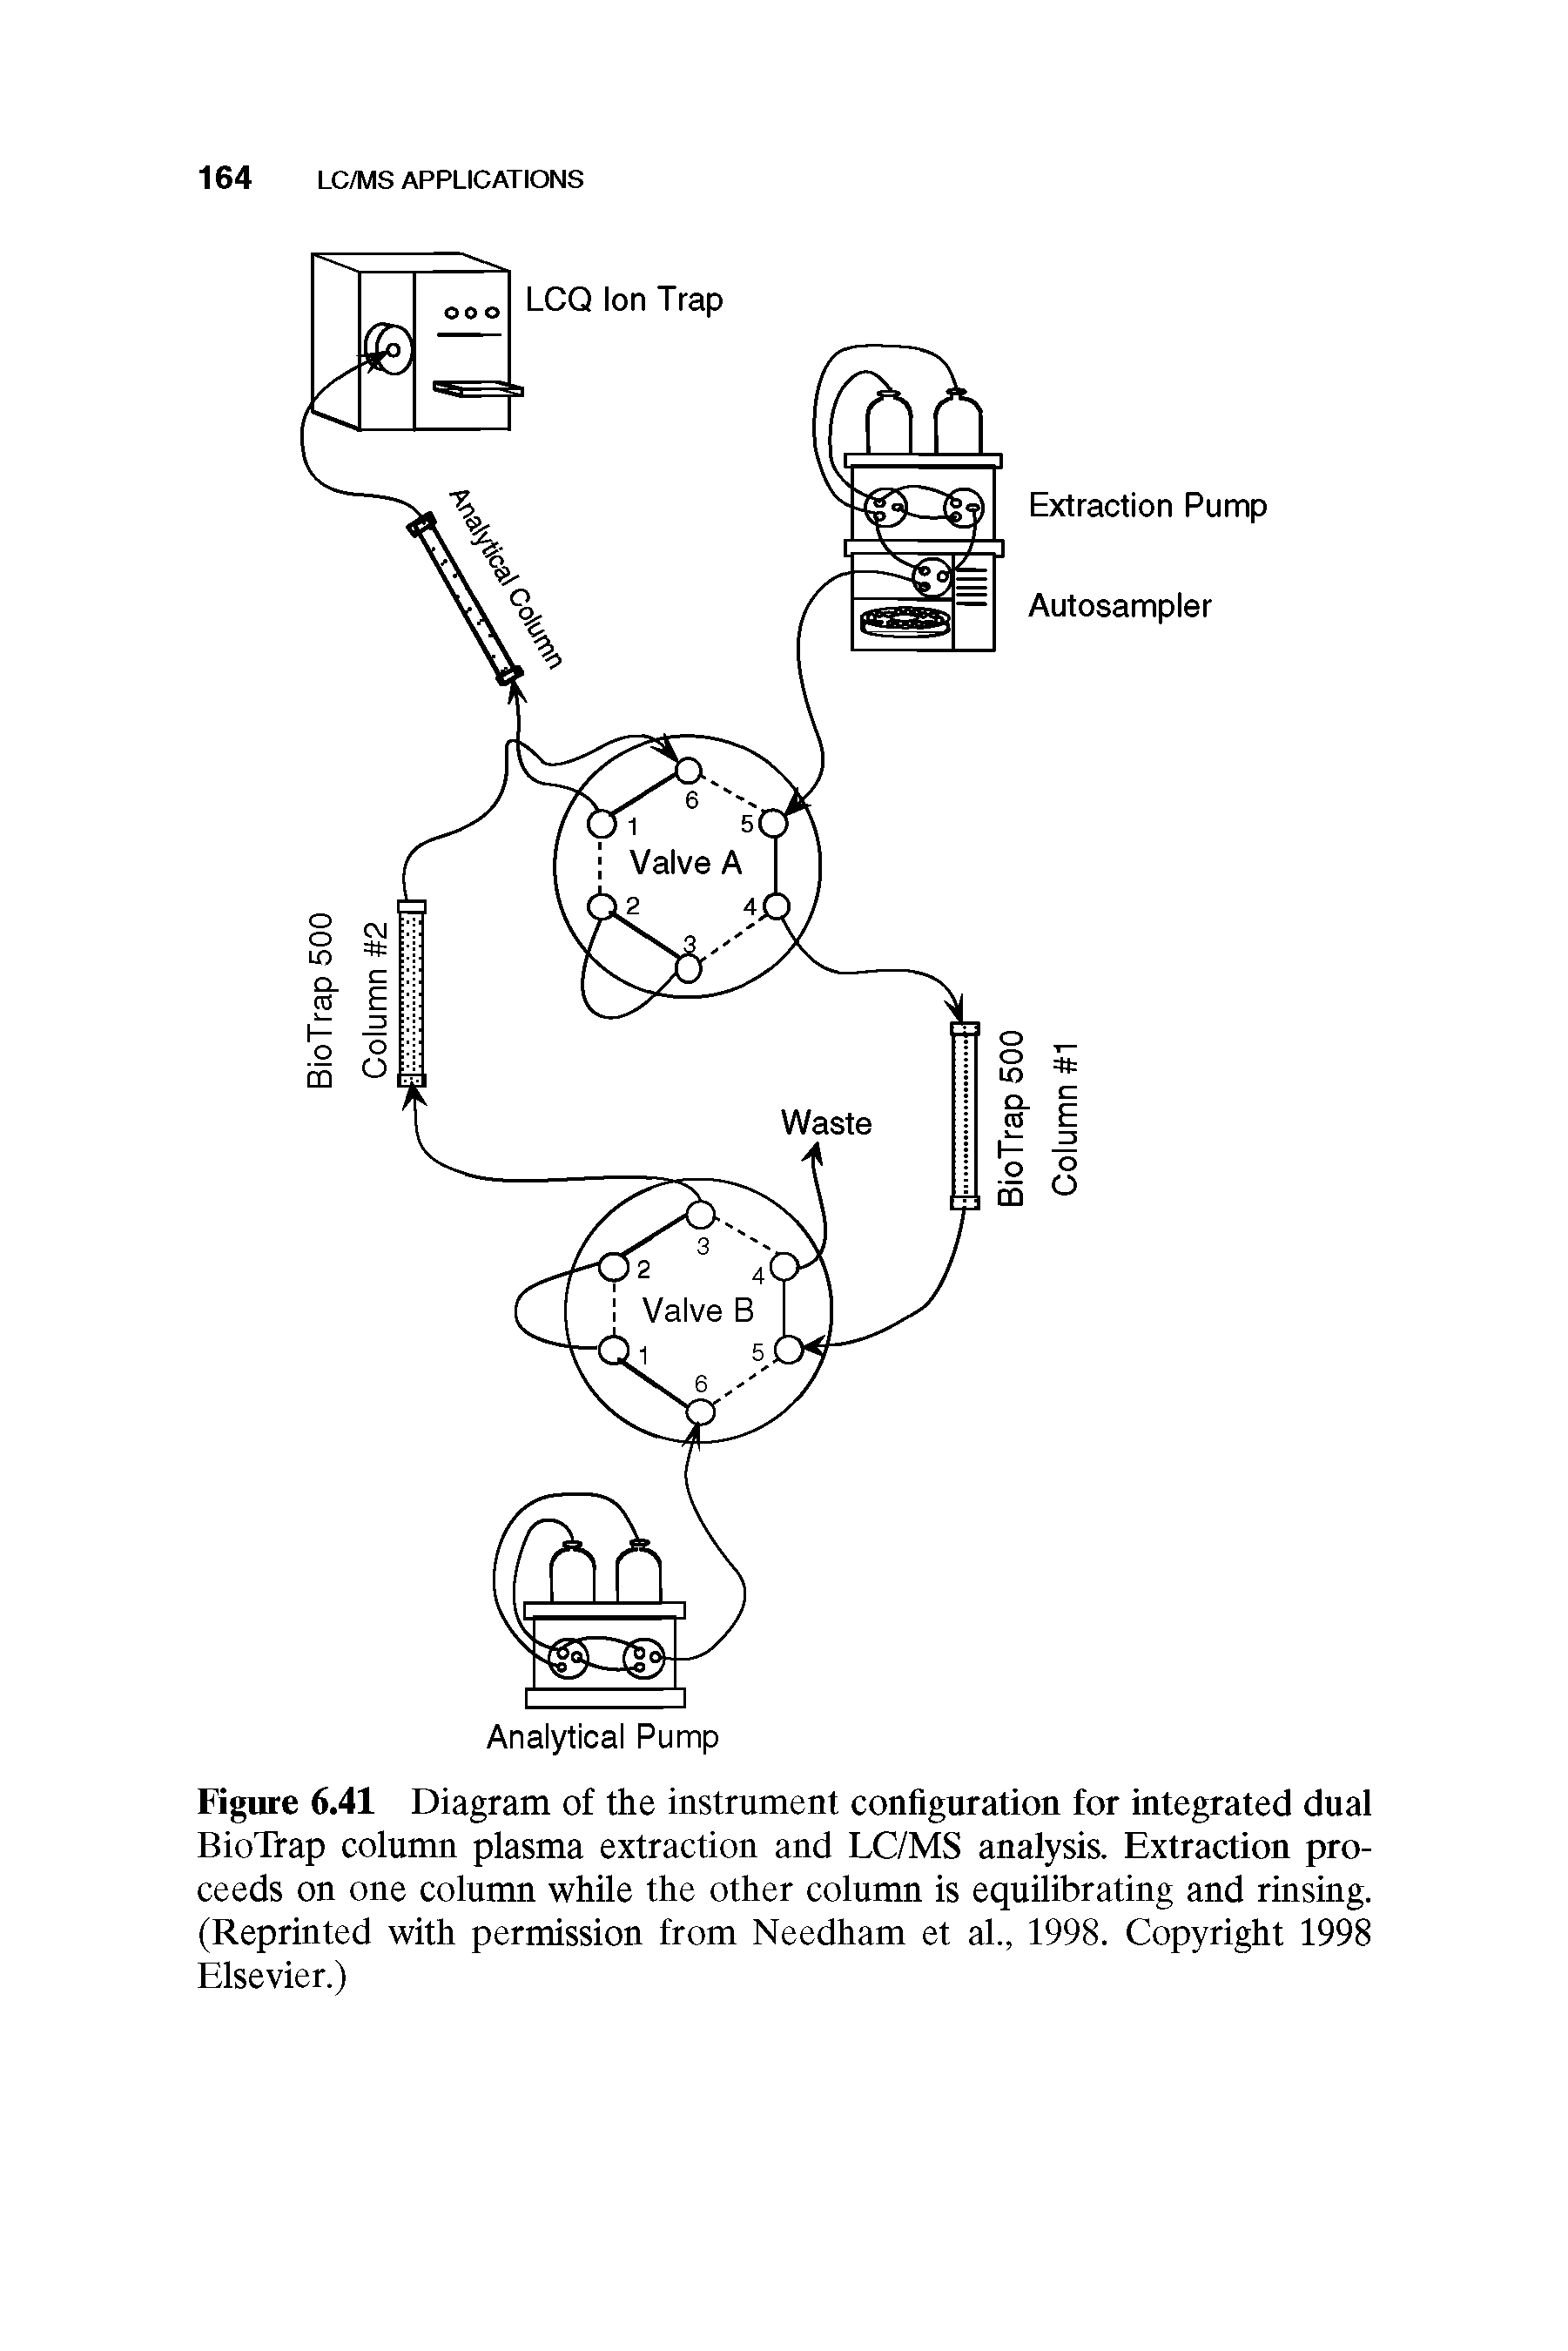 Figure 6.41 Diagram of the instrument configuration for integrated dual BioTrap column plasma extraction and LC/MS analysis. Extraction proceeds on one column while the other column is equilibrating and rinsing. (Reprinted with permission from Needham et al., 1998. Copyright 1998 Elsevier.)...